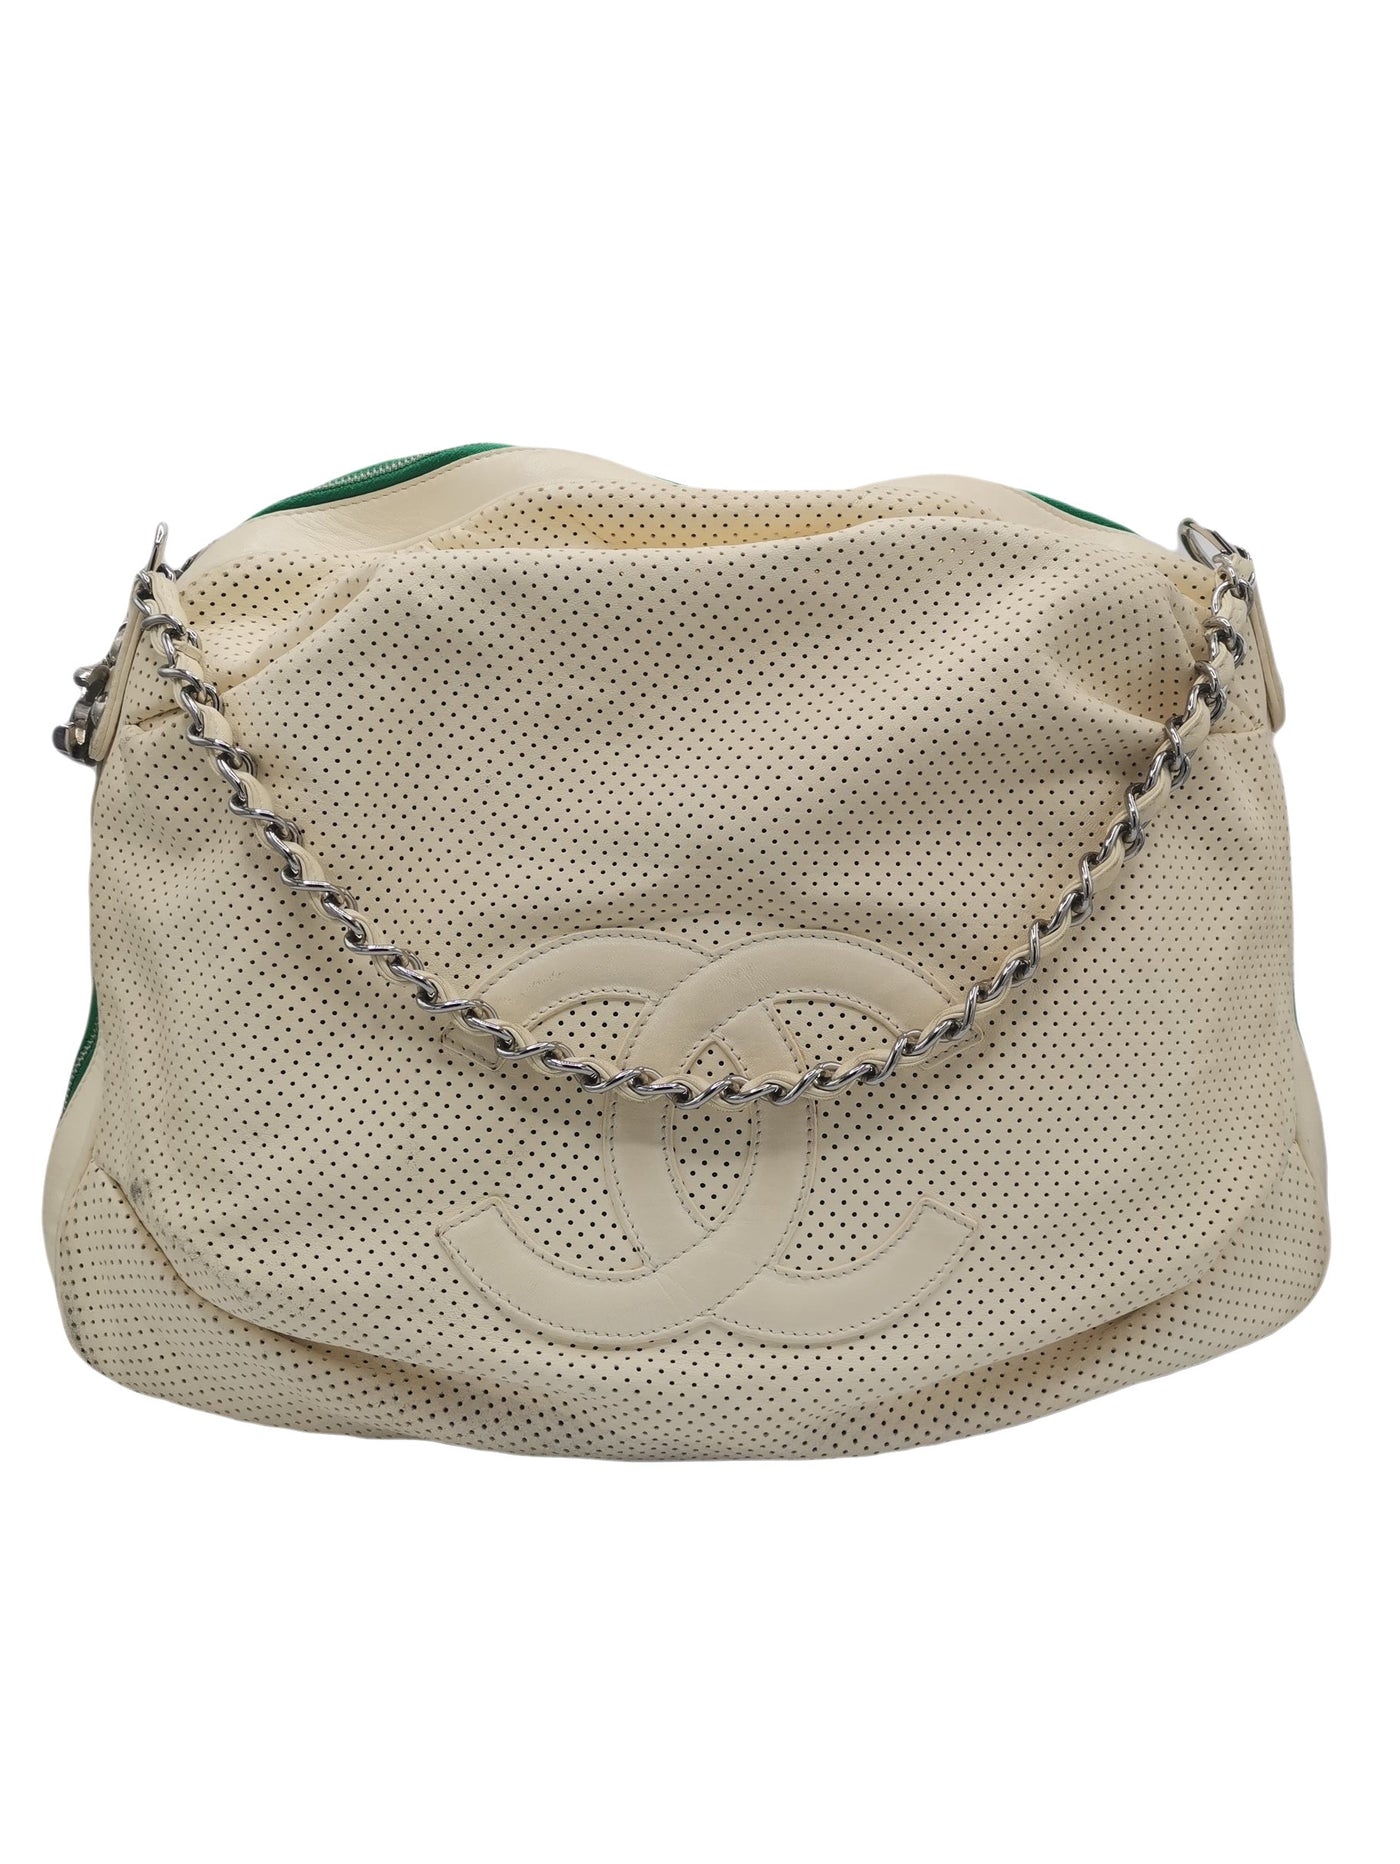 CHANEL y2k perforated leather cream handbag with silver hardware